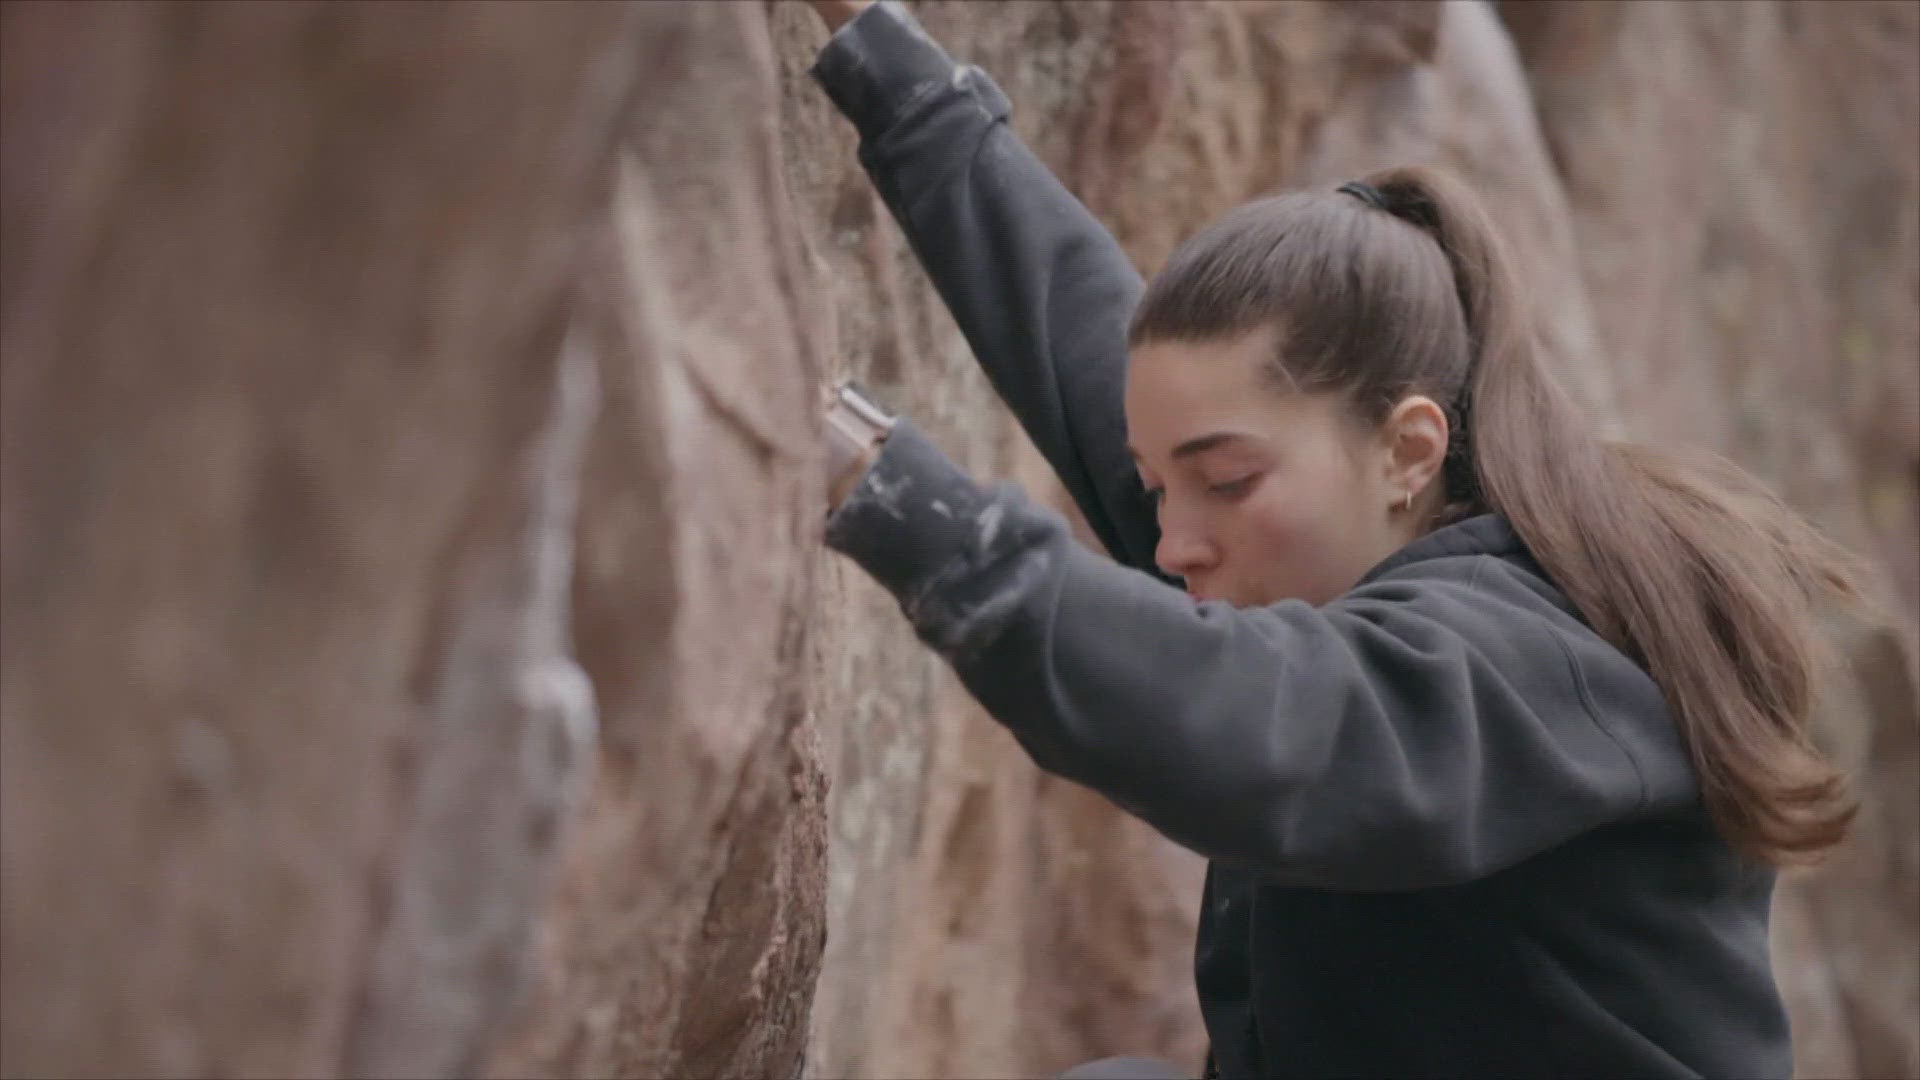 Brooke Raboutou has been climbing since she was a toddler.